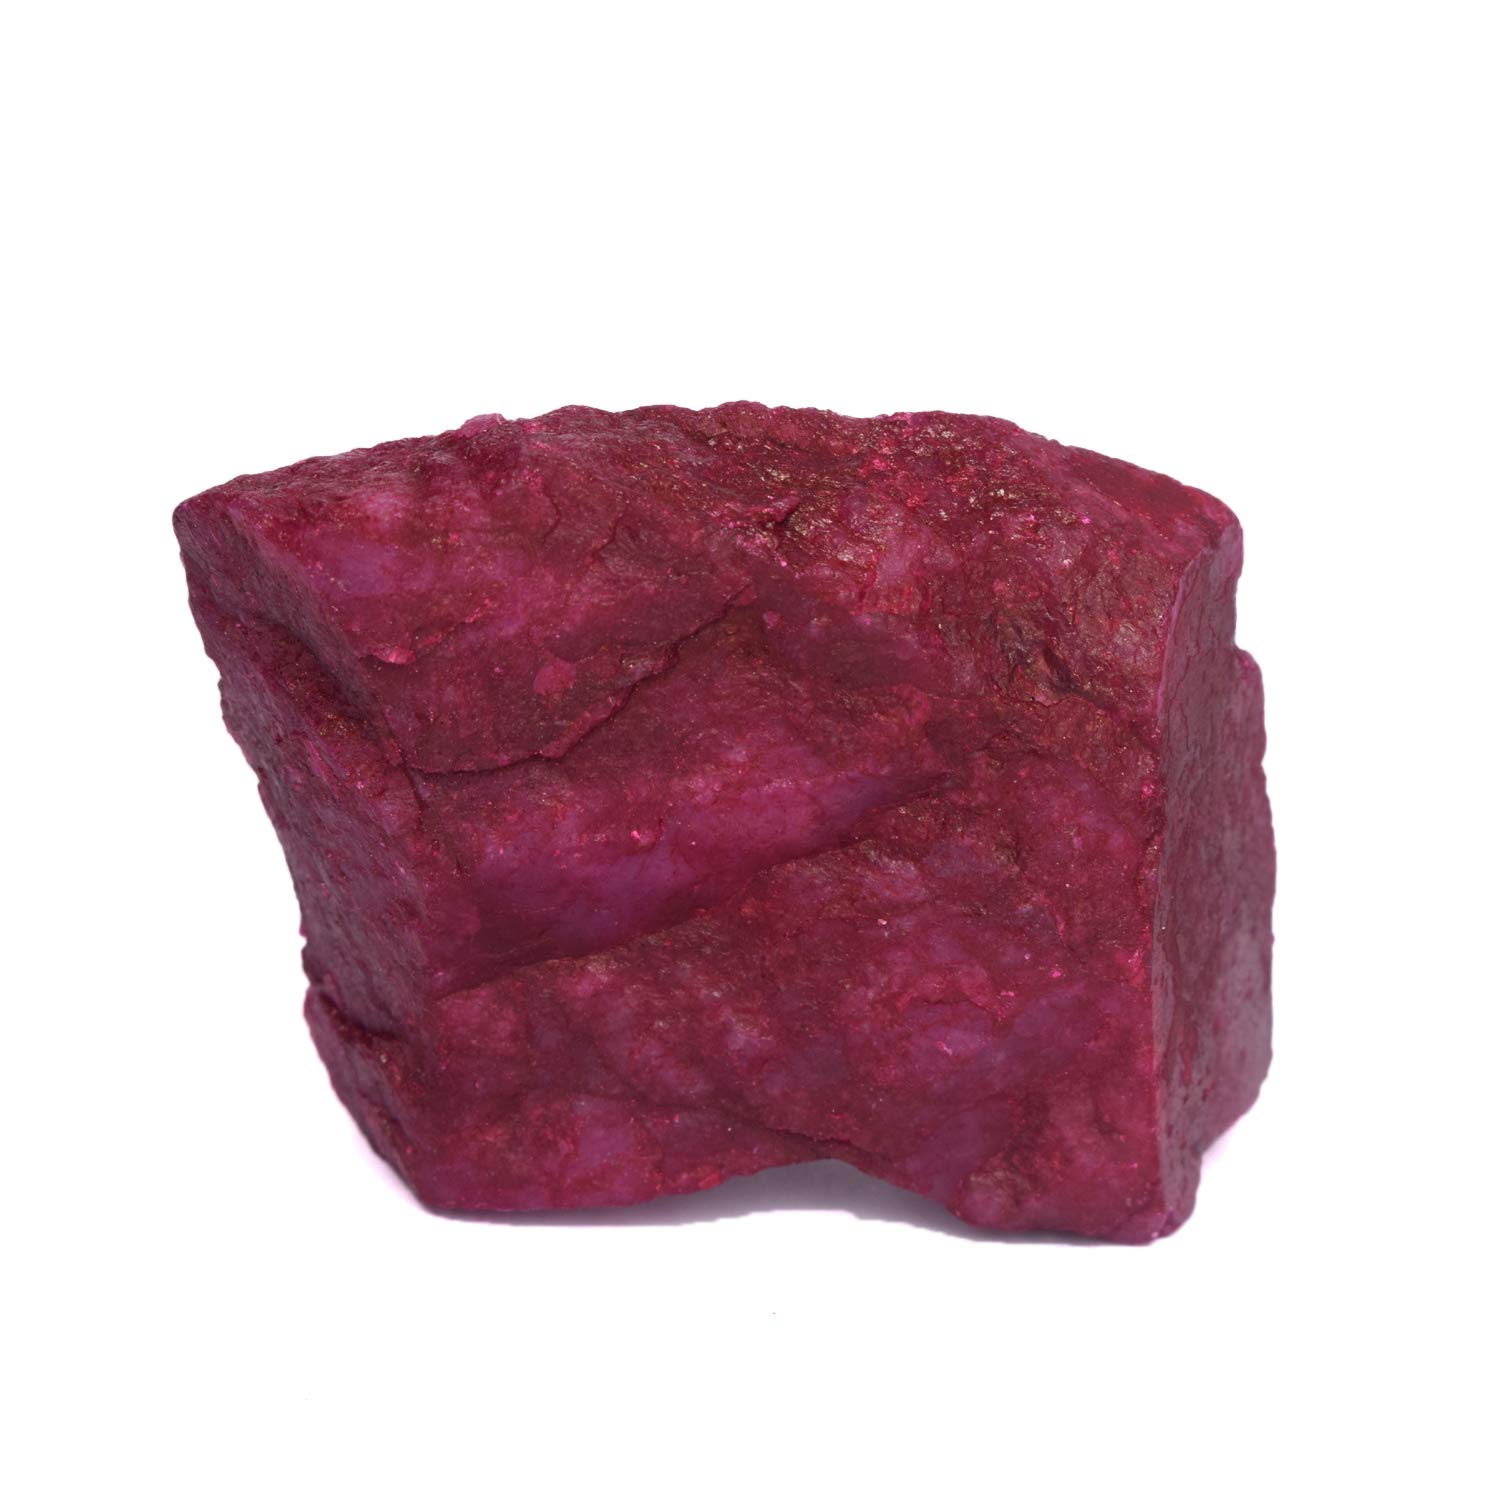 Raw Rough Ruby 901.00 Ct. Certified Uncut Healing Crystal Natural Red Ruby Gem Huge Ruby Rough